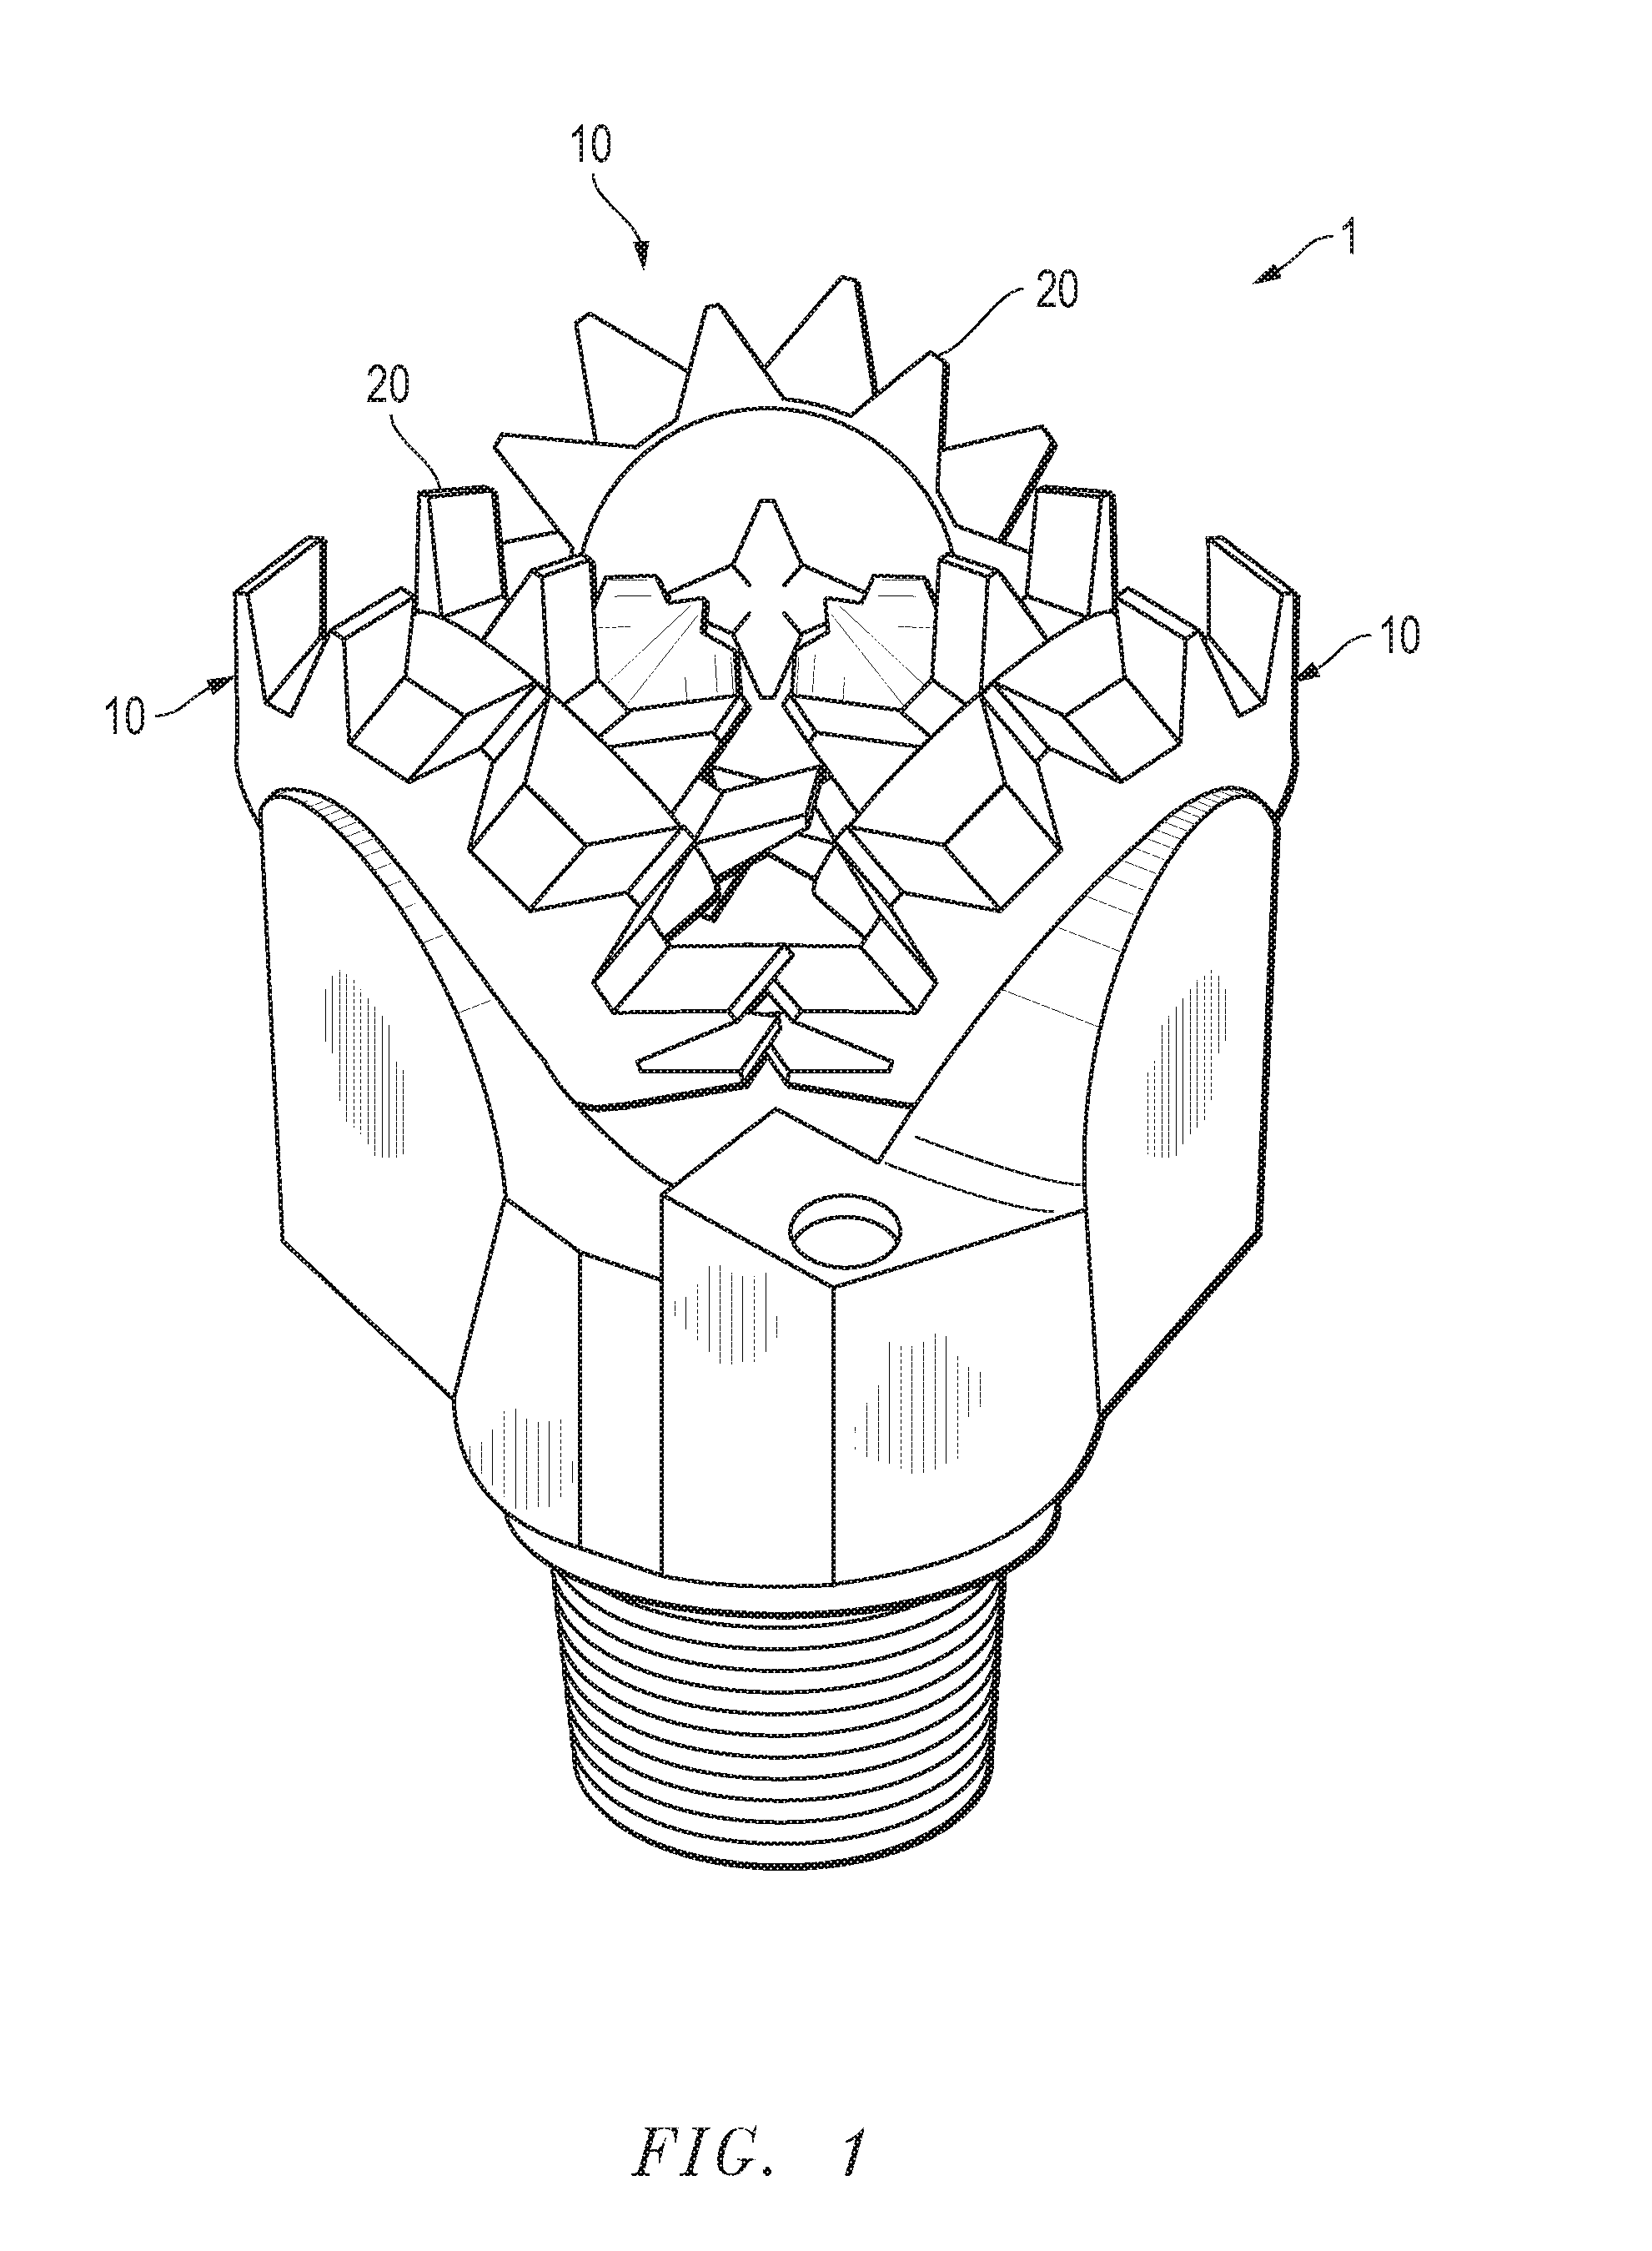 Method and Apparatus for the Automated Application of Hardfacing Material to Rolling Cutters of Earth-Boring Drill Bits